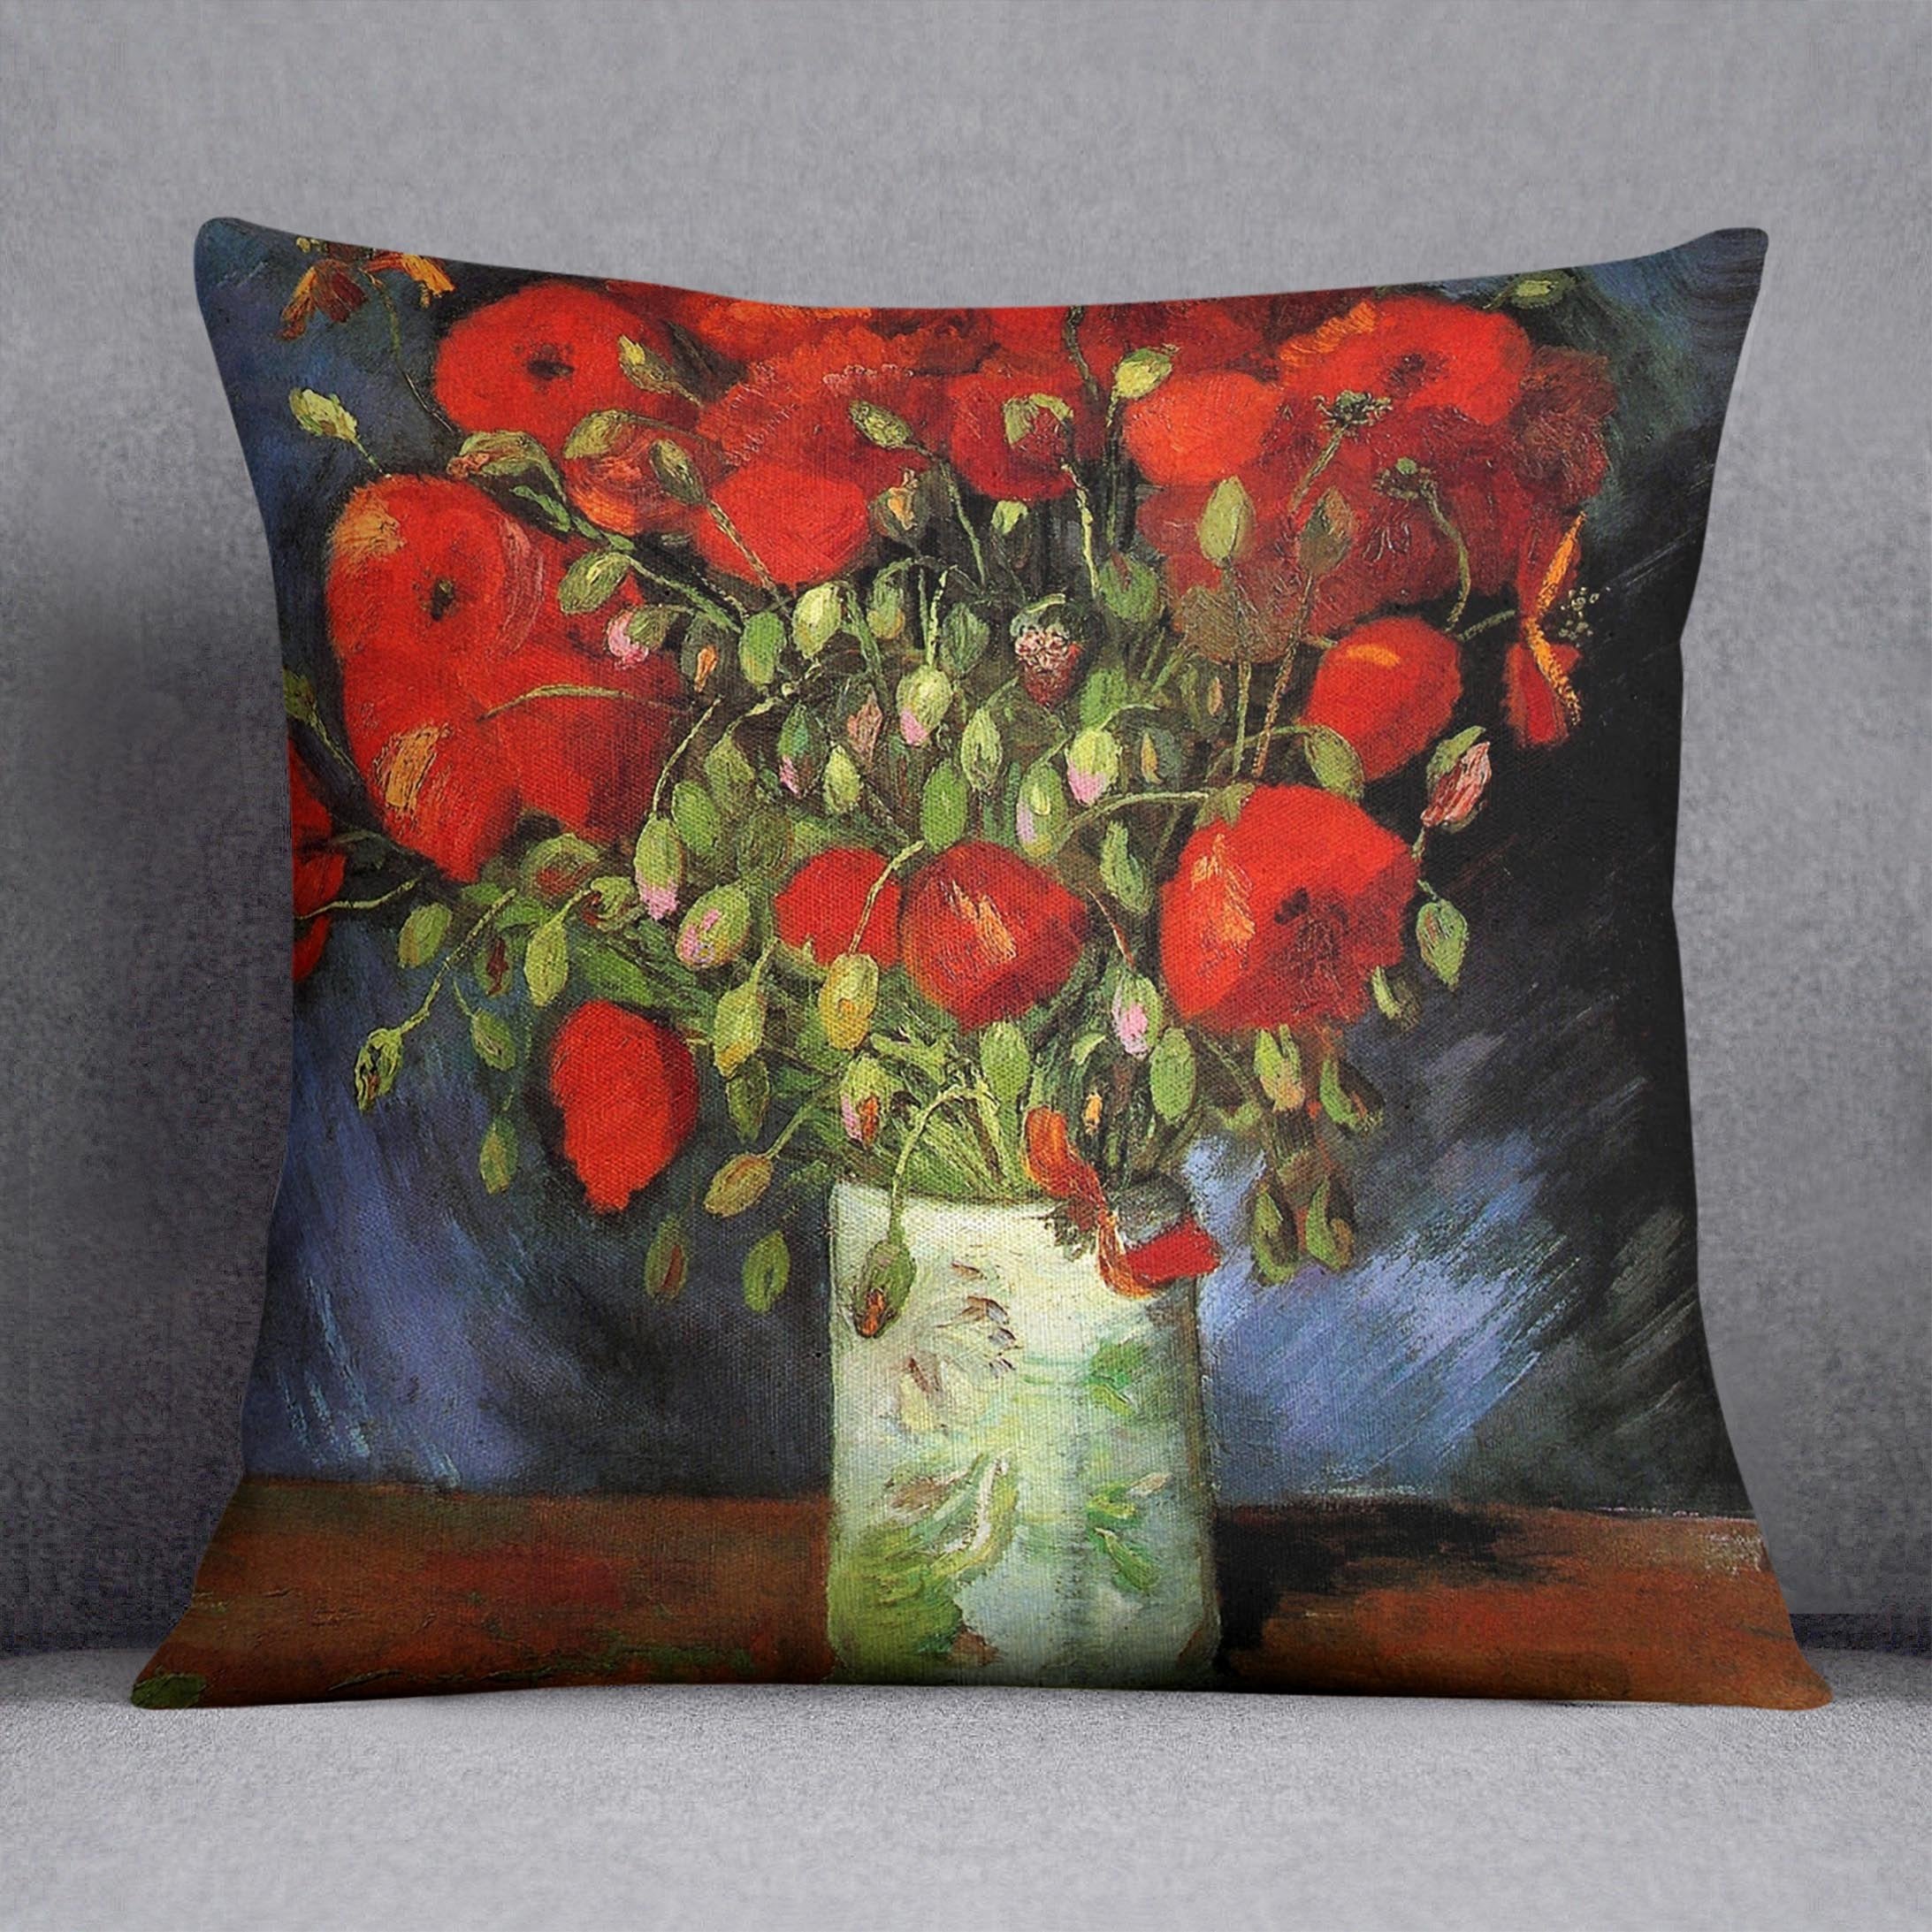 Vase with Red Poppies by Van Gogh Throw Pillow